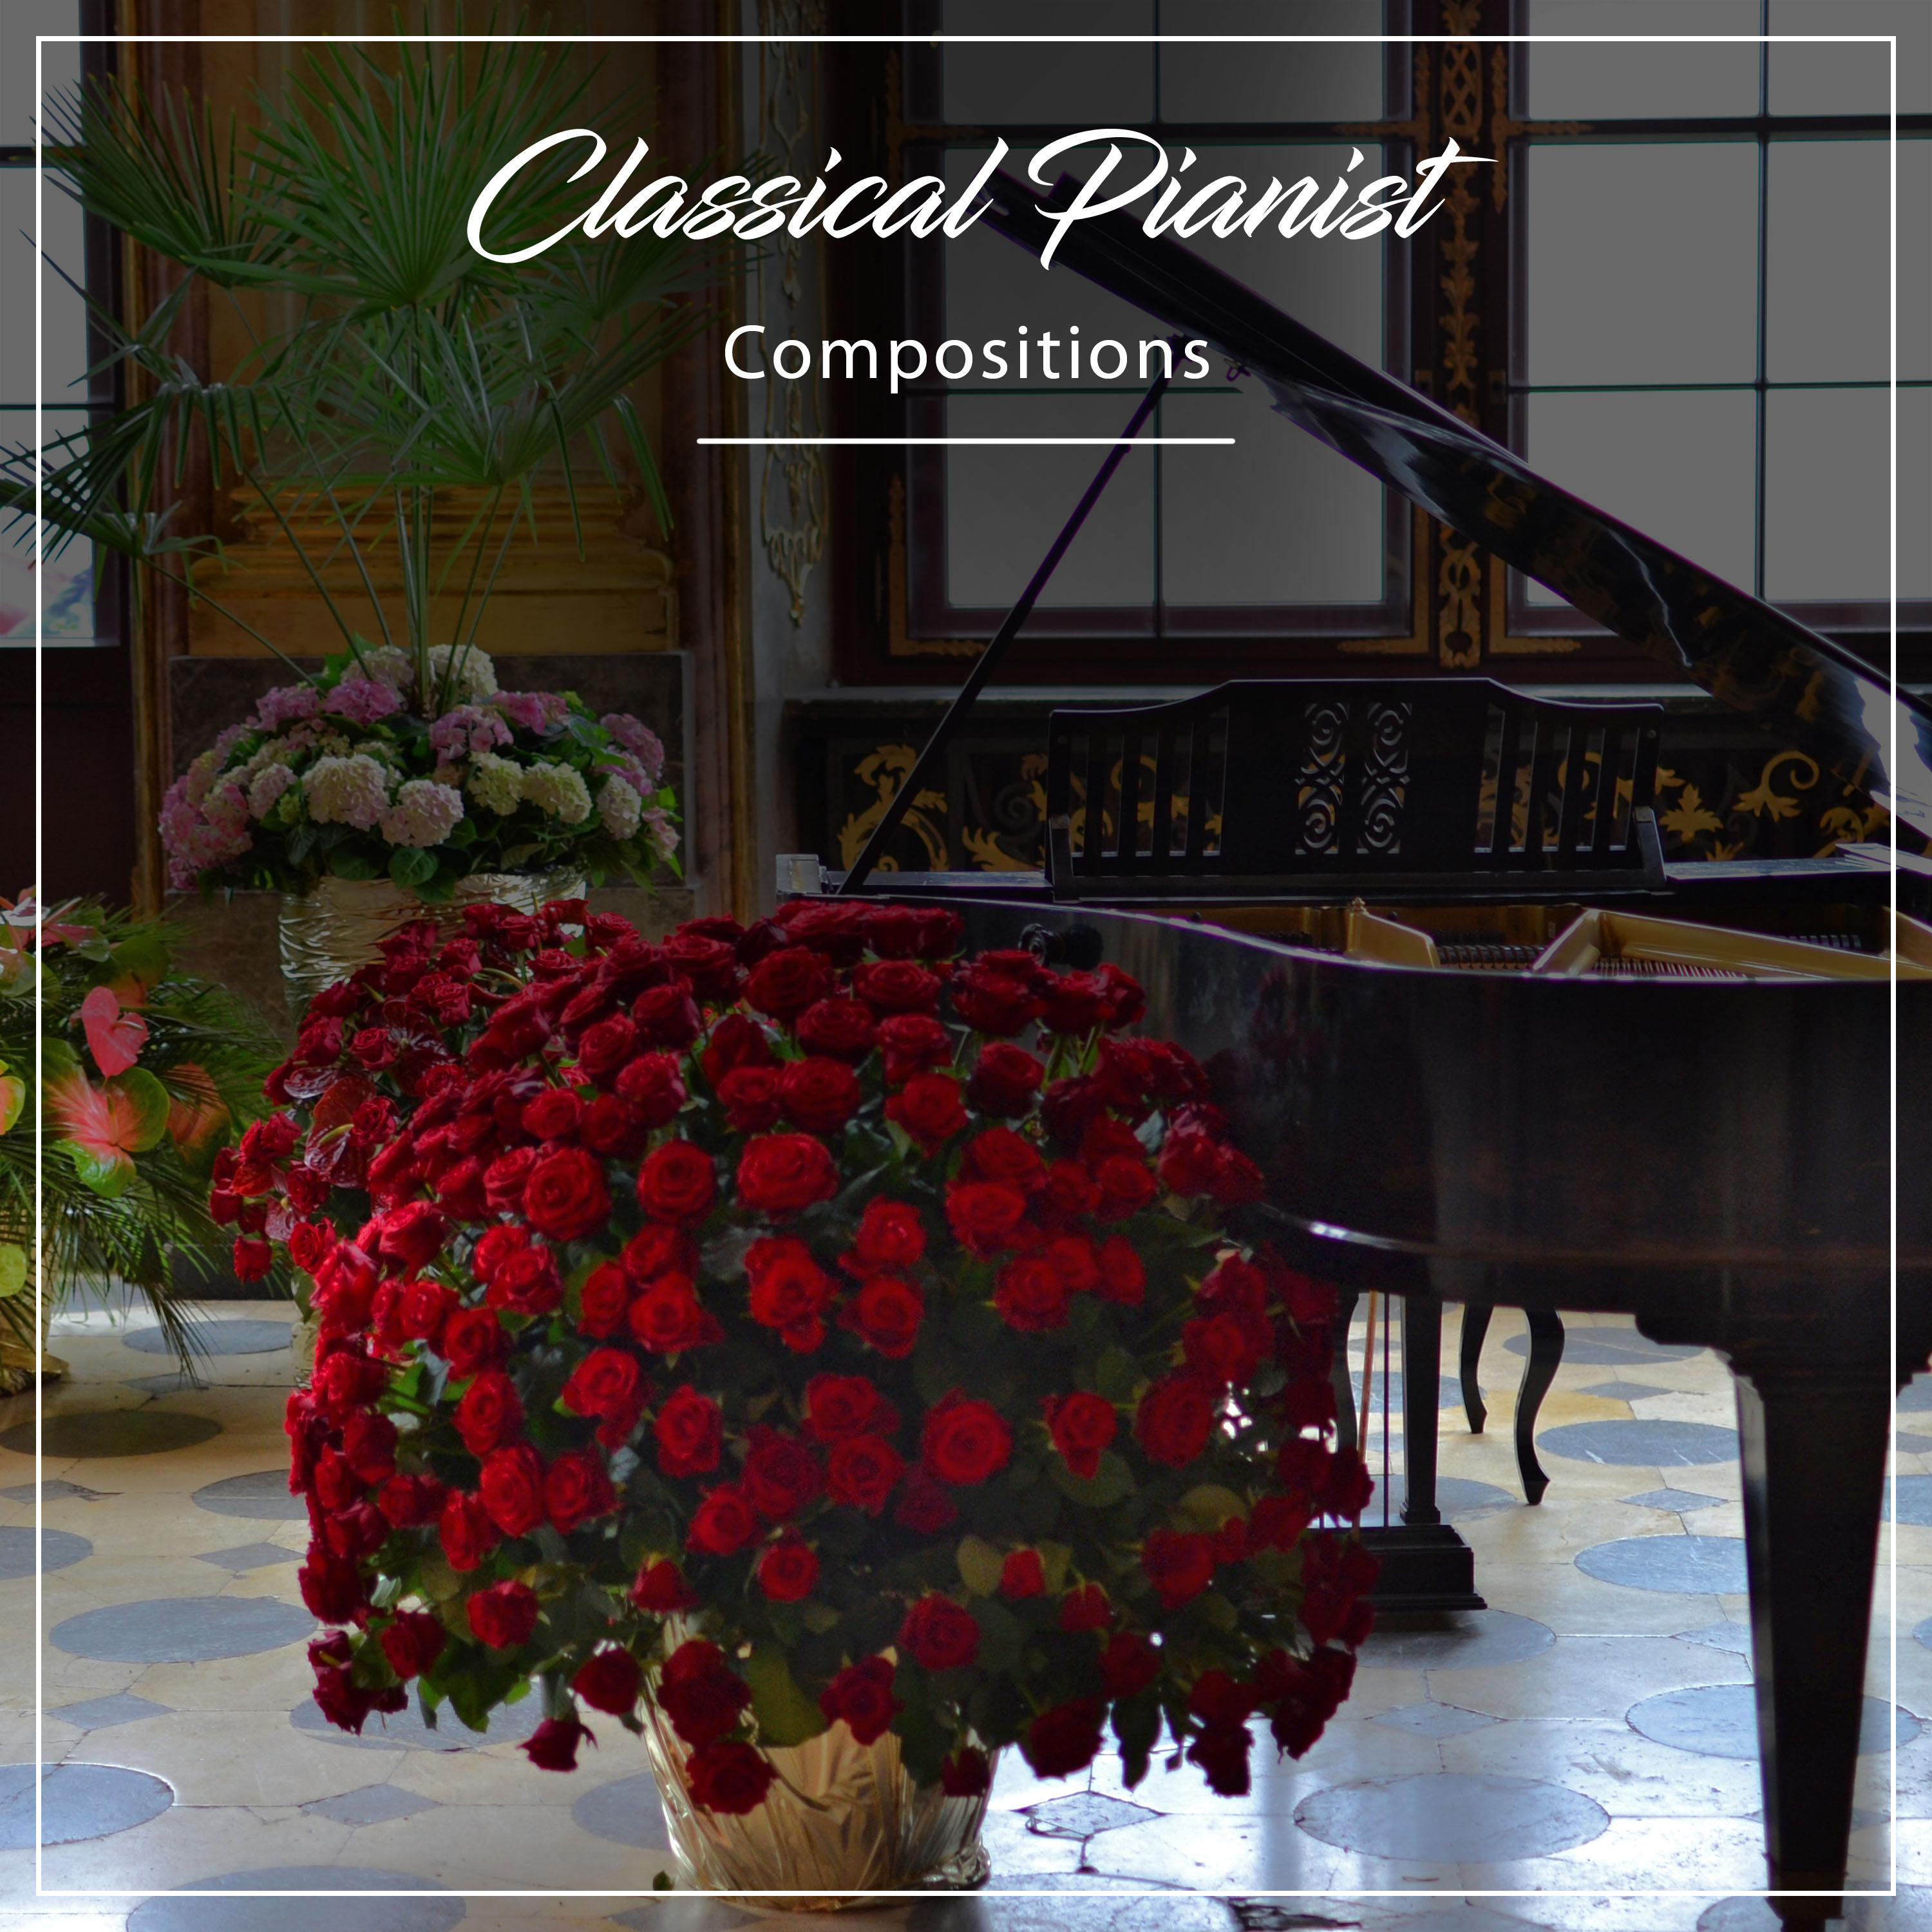 13 Classical Pianist Compositions for Ambience